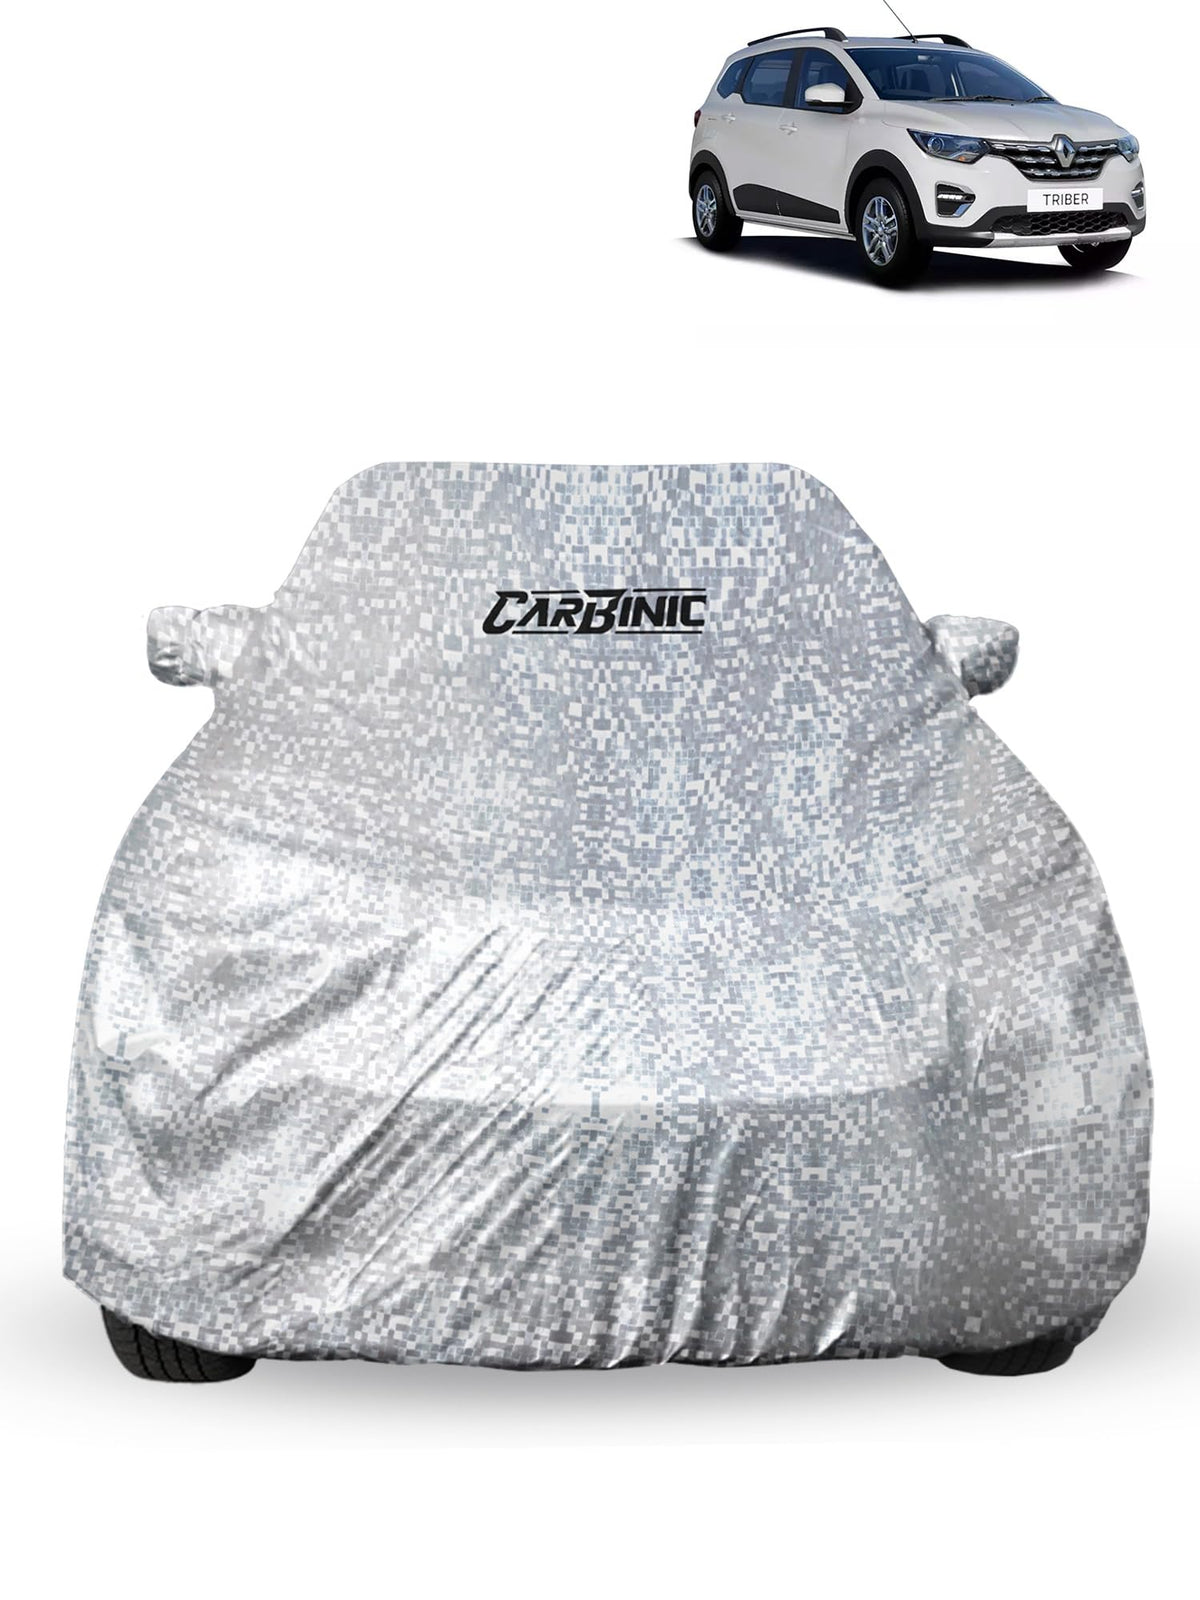 CARBINIC Car Cover for Renault Triber2019 Waterproof (Tested) and Dustproof Custom Fit UV Heat Resistant Outdoor Protection with Triple Stitched Fully Elastic Surface | Silver with Pockets